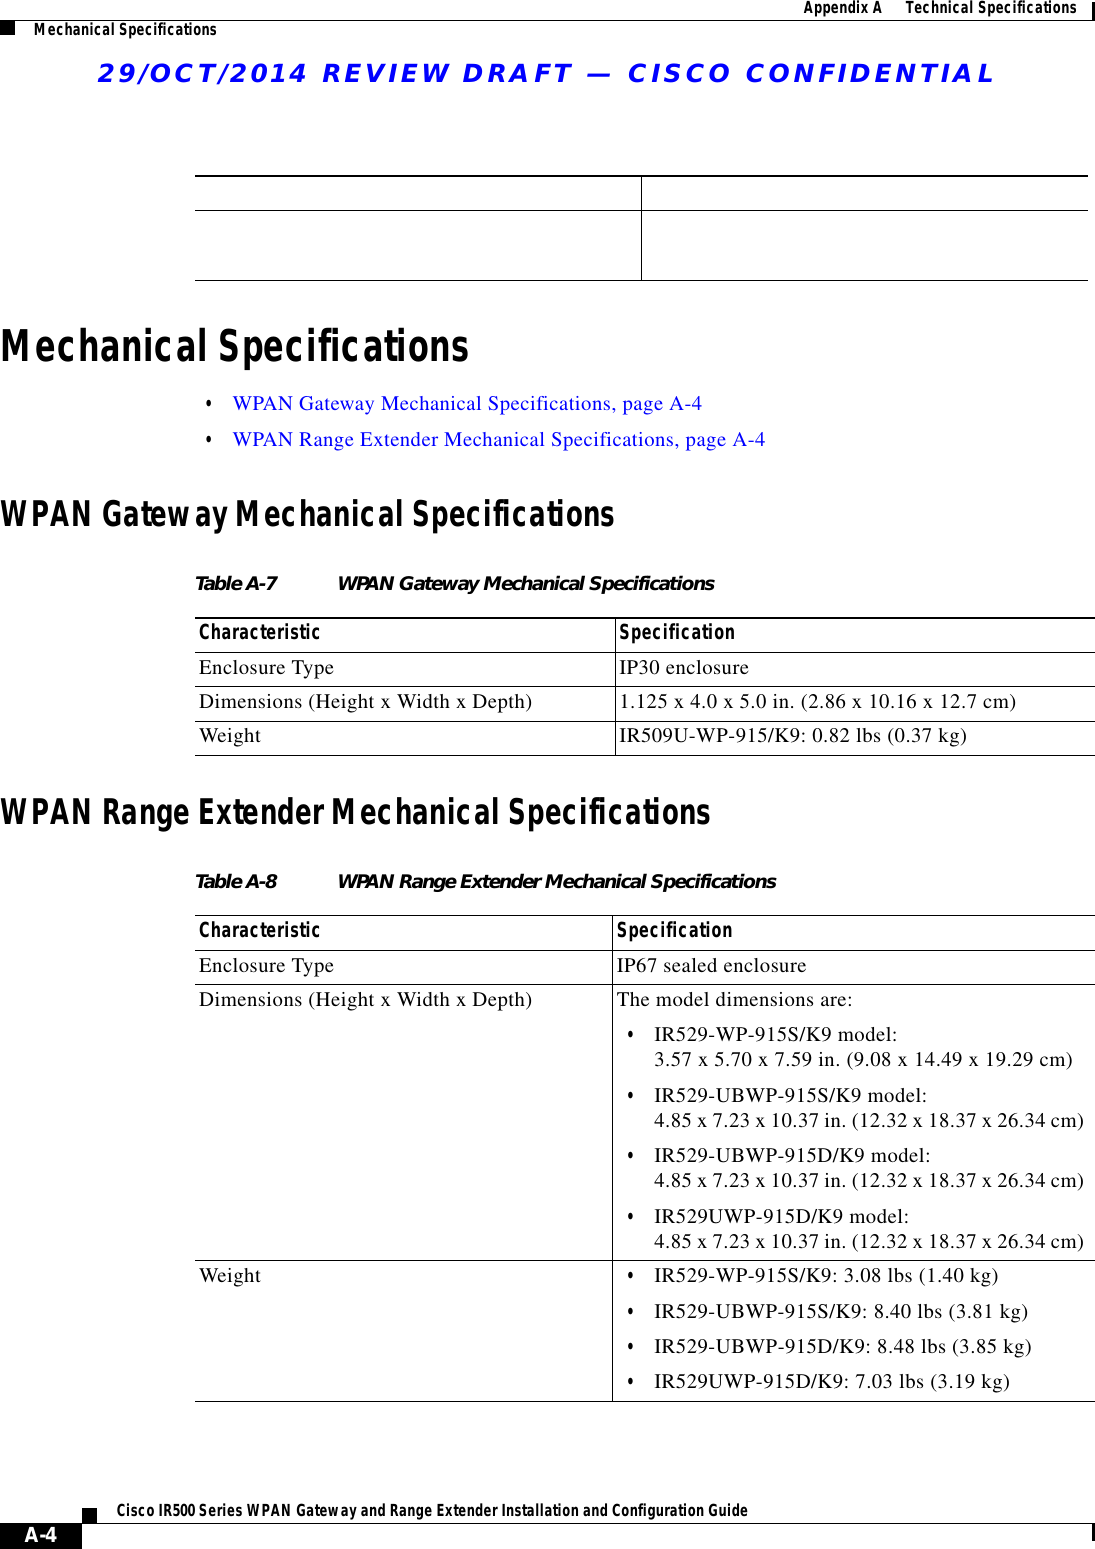 Table A-6 WPAN Gateway Alarm Ratings Alarm Ratings SpecificationAlarm input electrical specification    • States: Open or Closed Circuit  • Wire: 24 AWG to 18 AWG29/OCT/2014 REVIEW DRAFT — CISCO CONFIDENTIALA-4Cisco IR500 Series WPAN Gateway and Range Extender Installation and Configuration Guide  Appendix A      Technical Specifications Mechanical SpecificationsMechanical Specifications  • WPAN Gateway Mechanical Specifications, page A-4  • WPAN Range Extender Mechanical Specifications, page A-4WPAN Gateway Mechanical SpecificationsTable A-7 WPAN Gateway Mechanical Specifications Characteristic SpecificationEnclosure Type IP30 enclosureDimensions (Height x Width x Depth) 1.125 x 4.0 x 5.0 in. (2.86 x 10.16 x 12.7 cm)Weight IR509U-WP-915/K9: 0.82 lbs (0.37 kg)WPAN Range Extender Mechanical SpecificationsTable A-8 WPAN Range Extender Mechanical Specifications Characteristic SpecificationEnclosure Type IP67 sealed enclosureDimensions (Height x Width x Depth) The model dimensions are:  • IR529-WP-915S/K9 model: 3.57 x 5.70 x 7.59 in. (9.08 x 14.49 x 19.29 cm)  • IR529-UBWP-915S/K9 model: 4.85 x 7.23 x 10.37 in. (12.32 x 18.37 x 26.34 cm)  • IR529-UBWP-915D/K9 model: 4.85 x 7.23 x 10.37 in. (12.32 x 18.37 x 26.34 cm)  • IR529UWP-915D/K9 model: 4.85 x 7.23 x 10.37 in. (12.32 x 18.37 x 26.34 cm)Weight   • IR529-WP-915S/K9: 3.08 lbs (1.40 kg)  • IR529-UBWP-915S/K9: 8.40 lbs (3.81 kg)  • IR529-UBWP-915D/K9: 8.48 lbs (3.85 kg)  • IR529UWP-915D/K9: 7.03 lbs (3.19 kg)